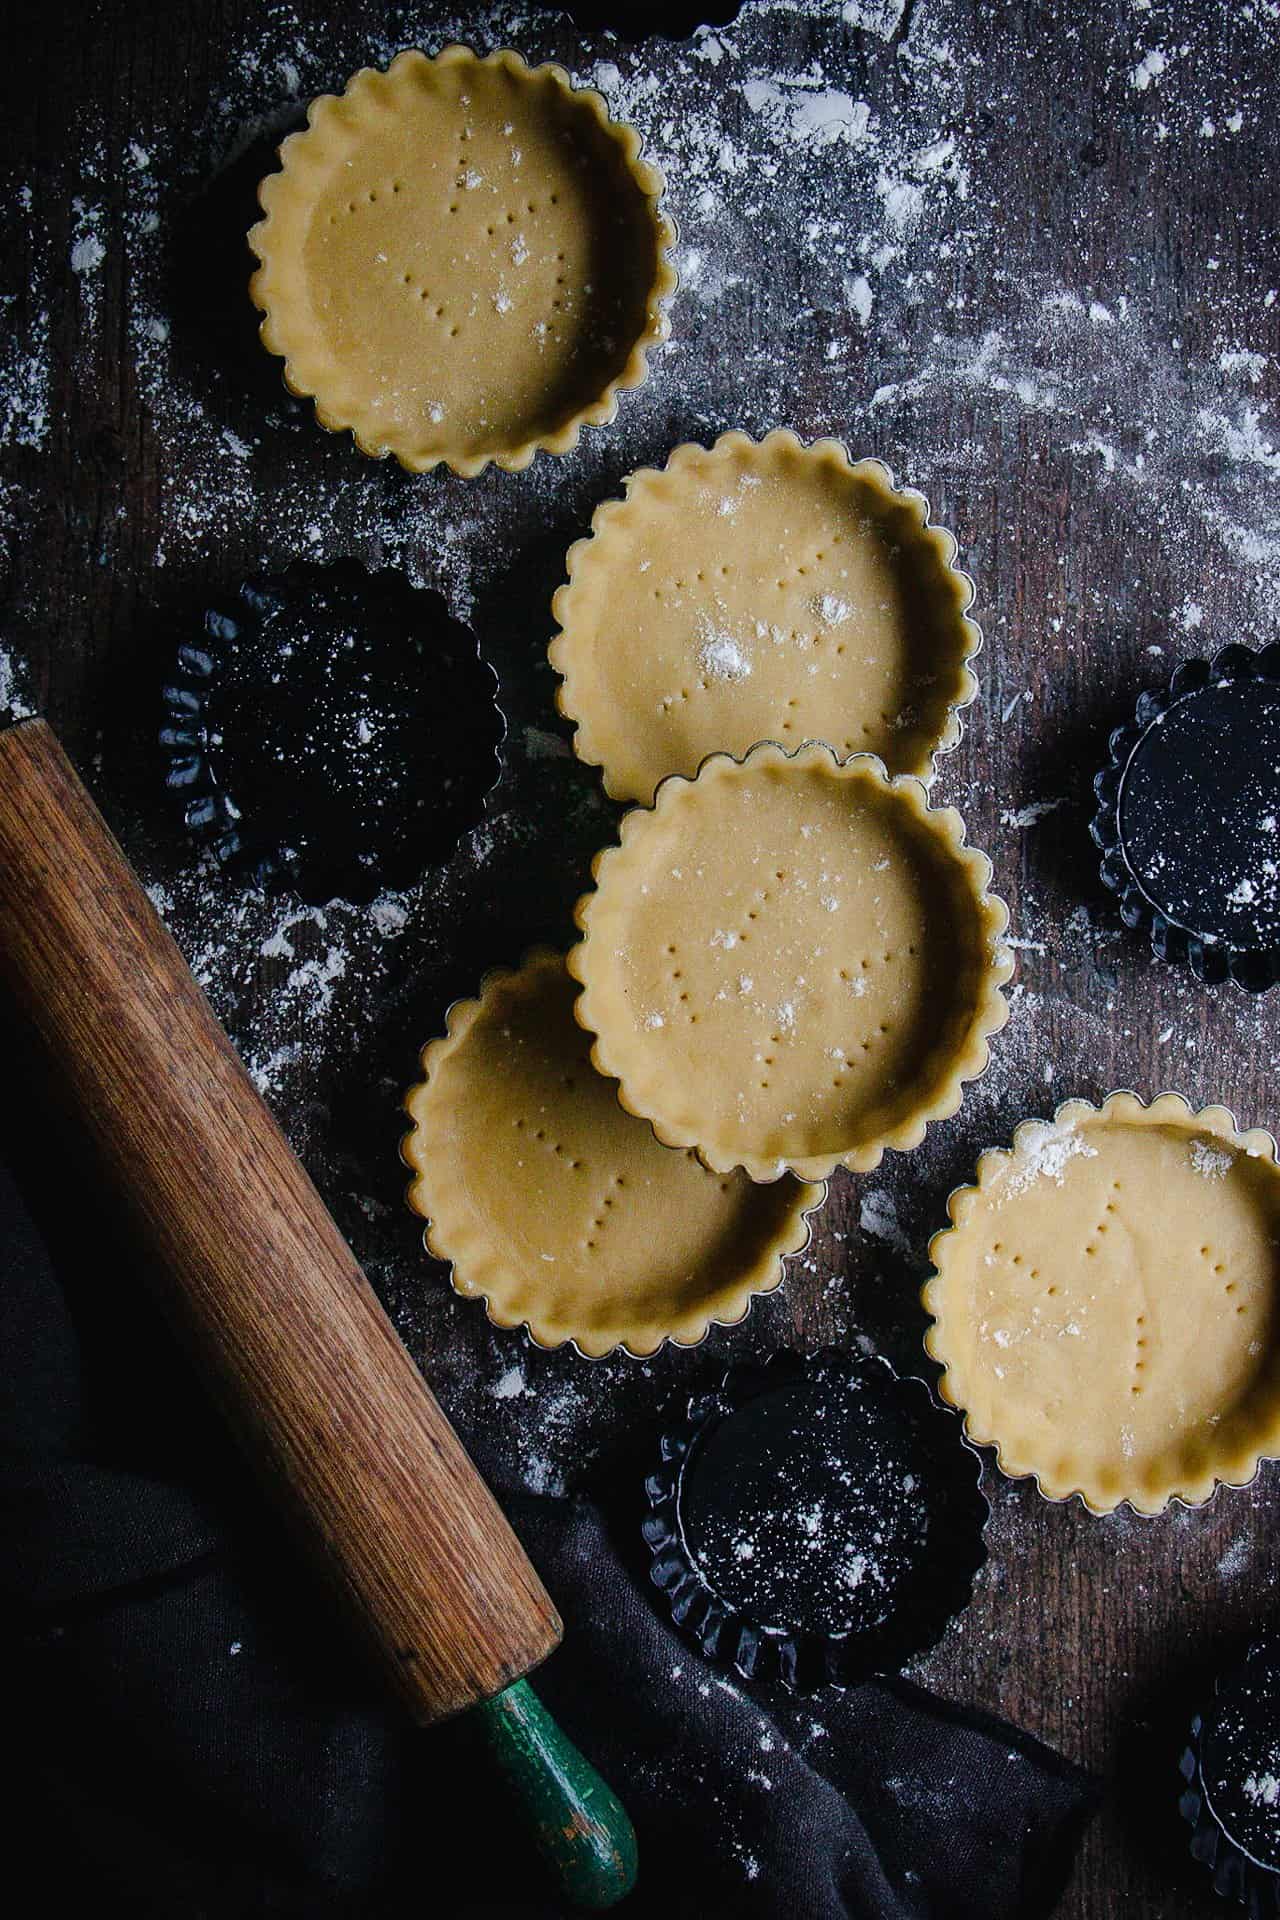 sour cream pastry mini tarts, docked and ready to be blind baked